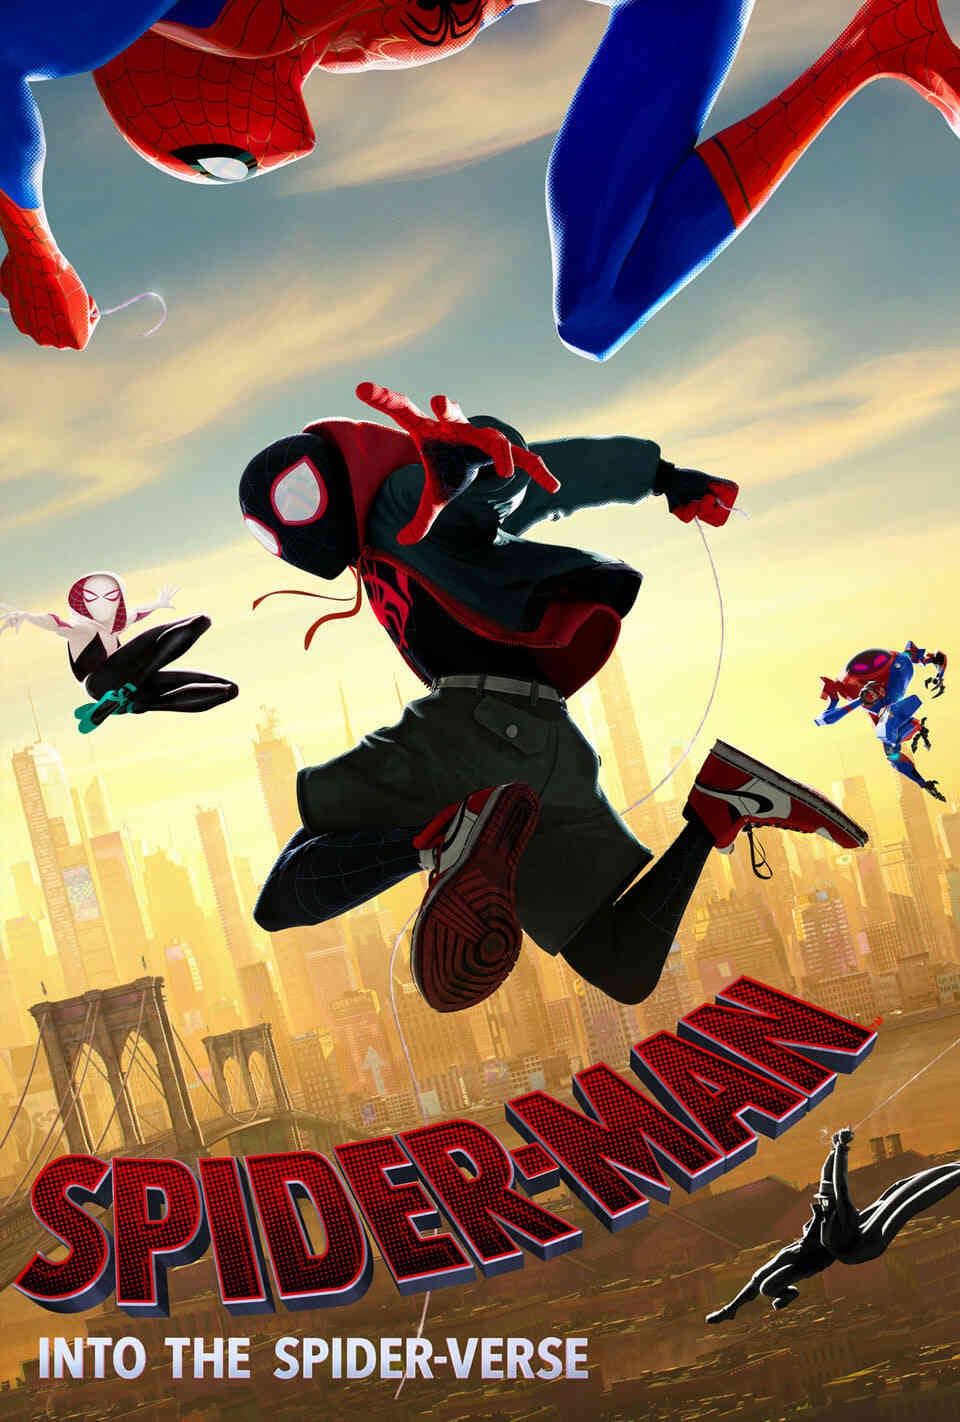 Read Into the Spider-Verse screenplay (poster)